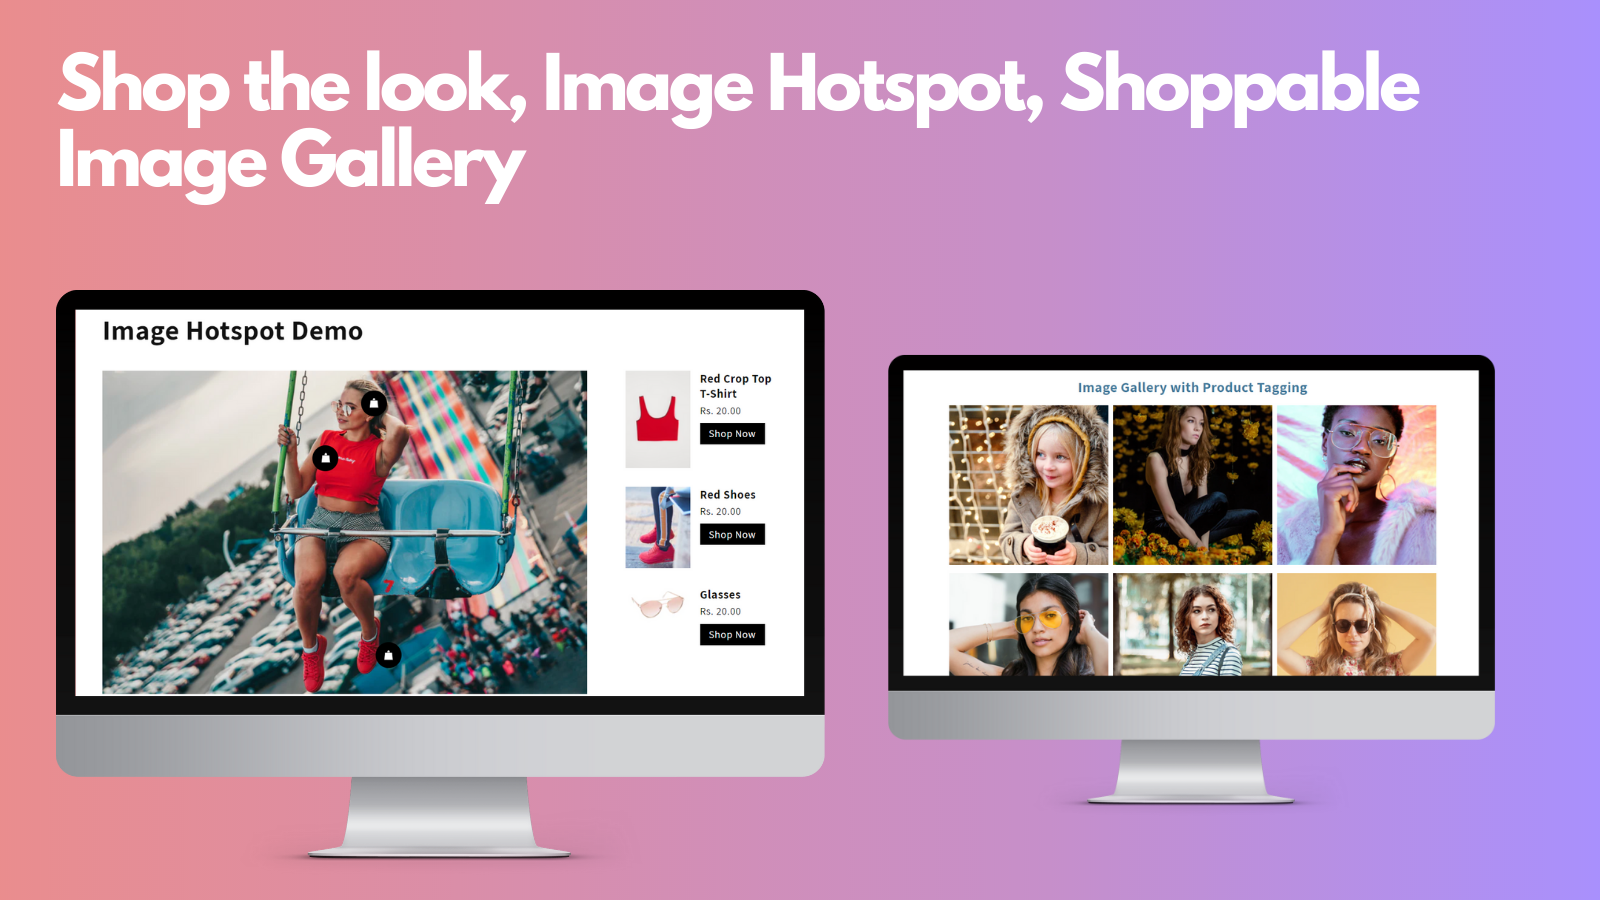 Shop the look, lookbook, Shoppable Image Gallery